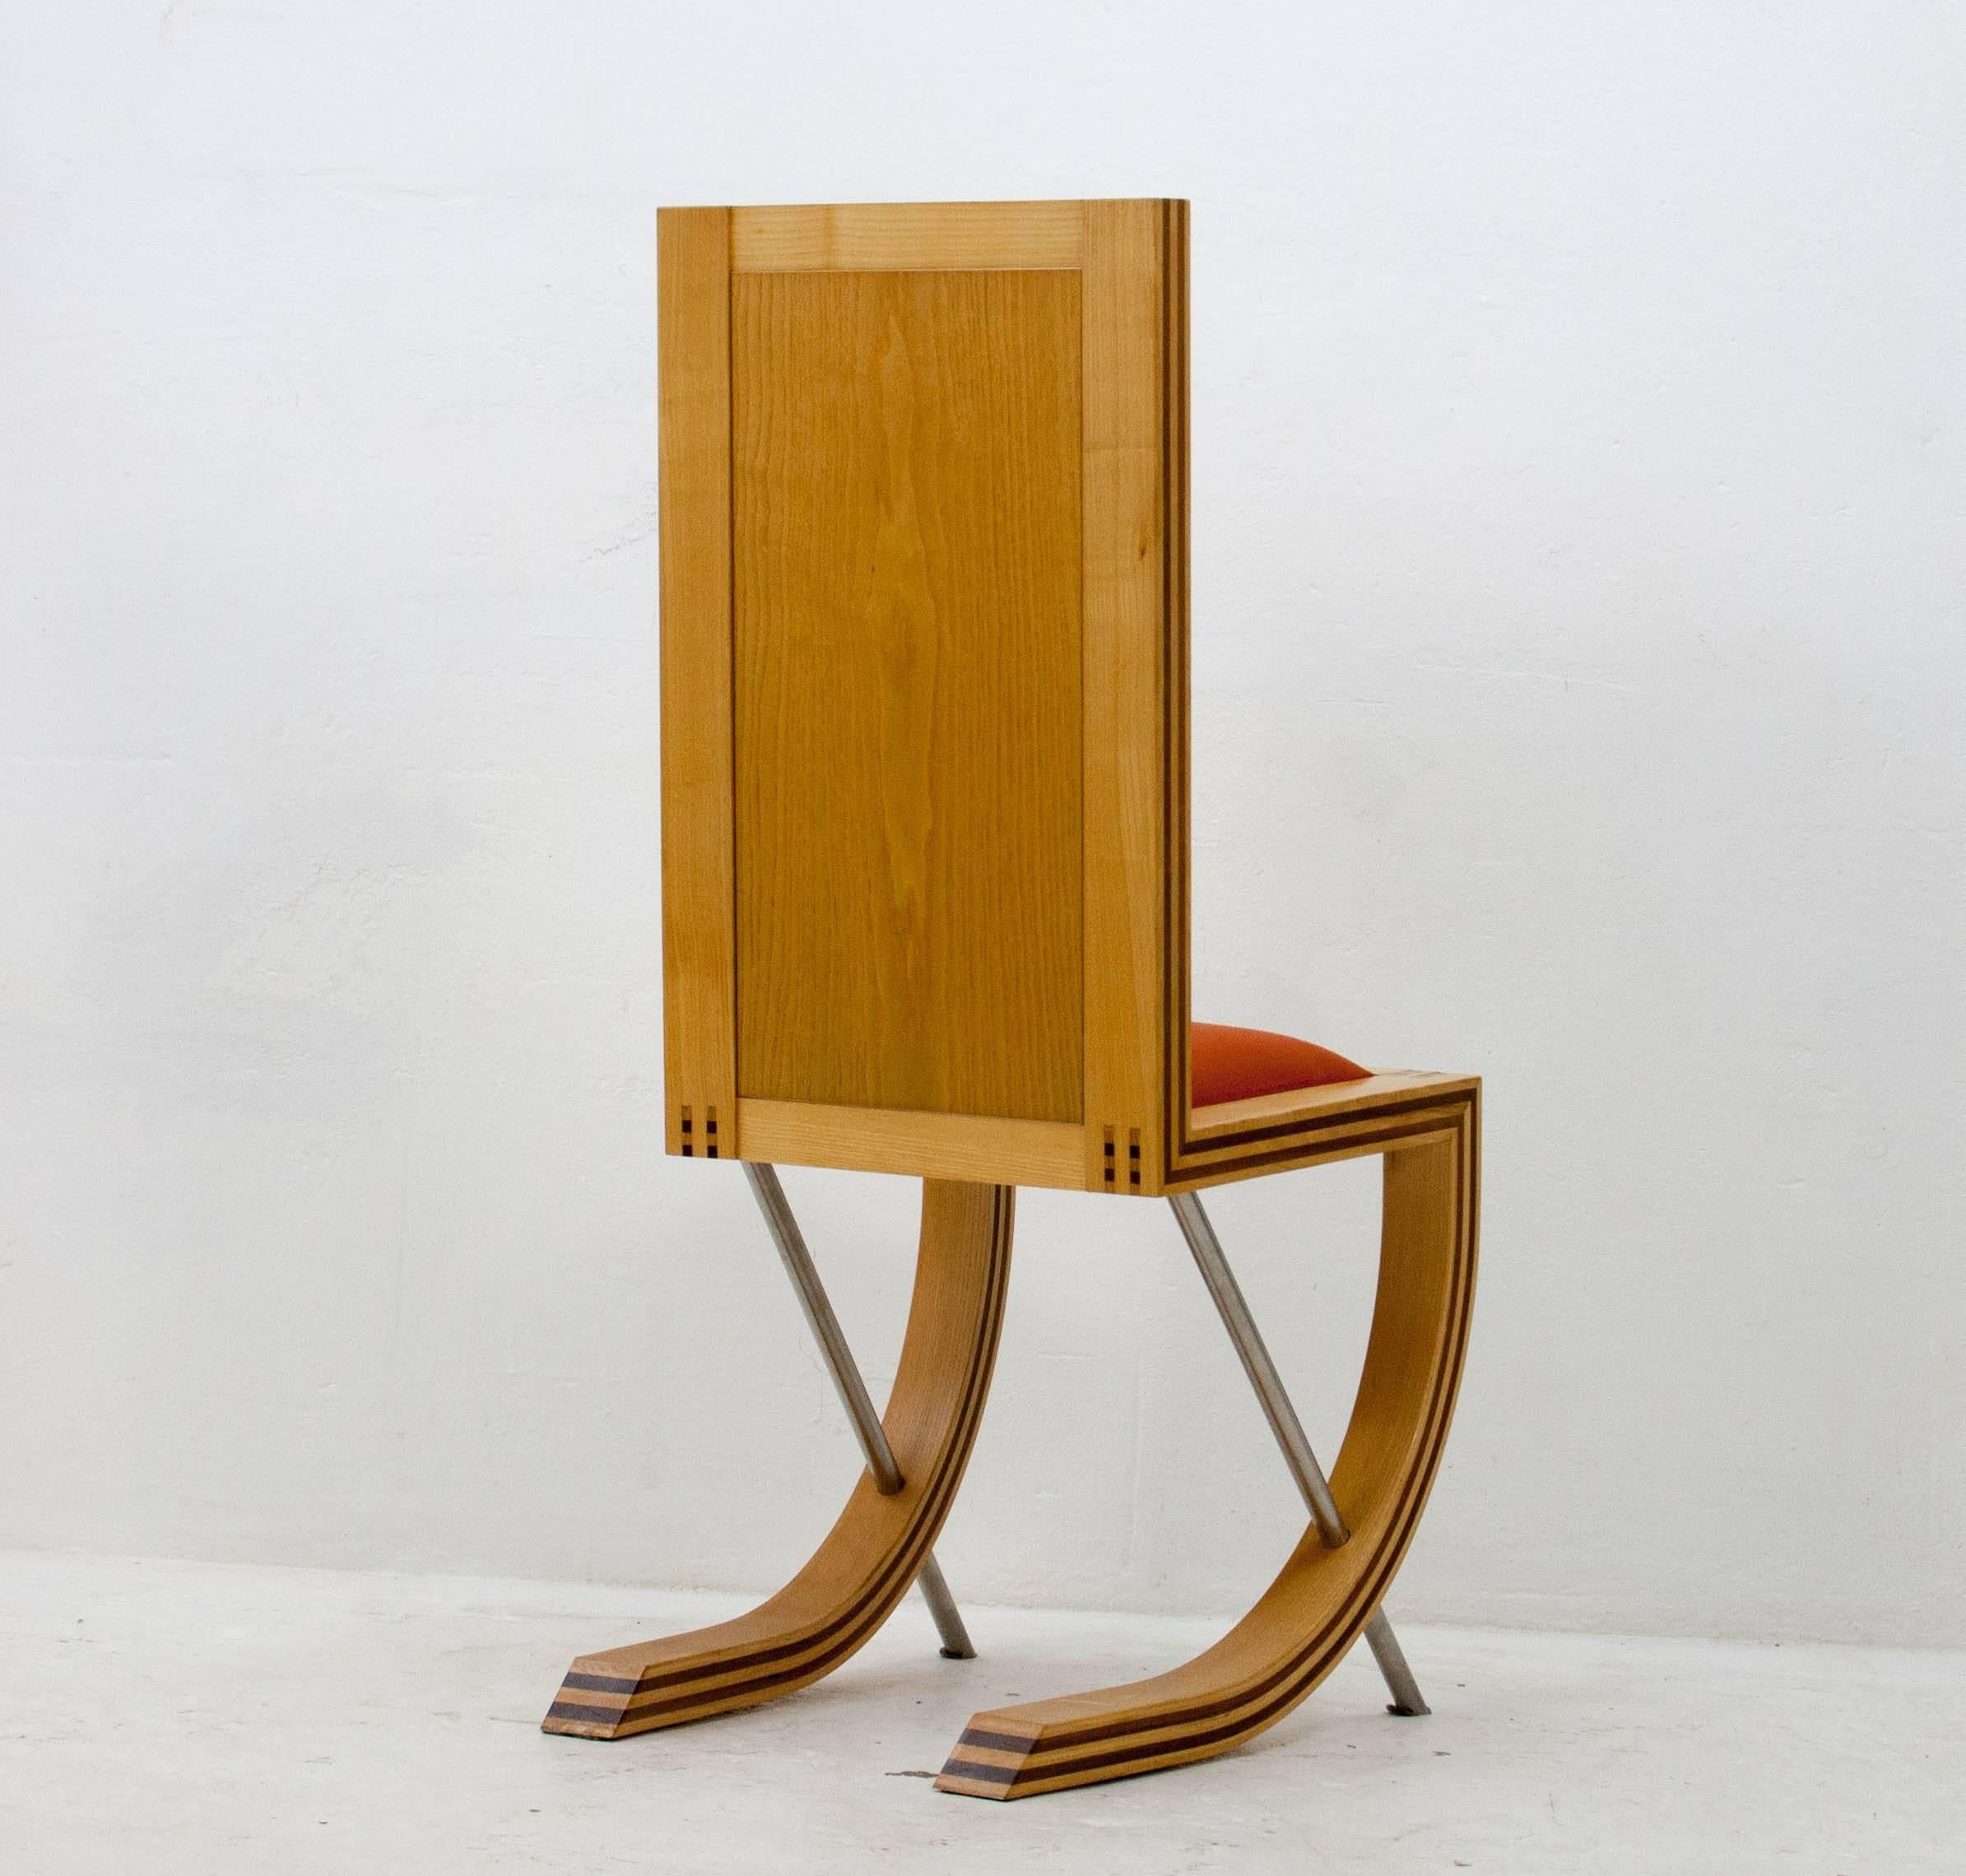 Contemporary Handcrafted Decorative Chair, 2007